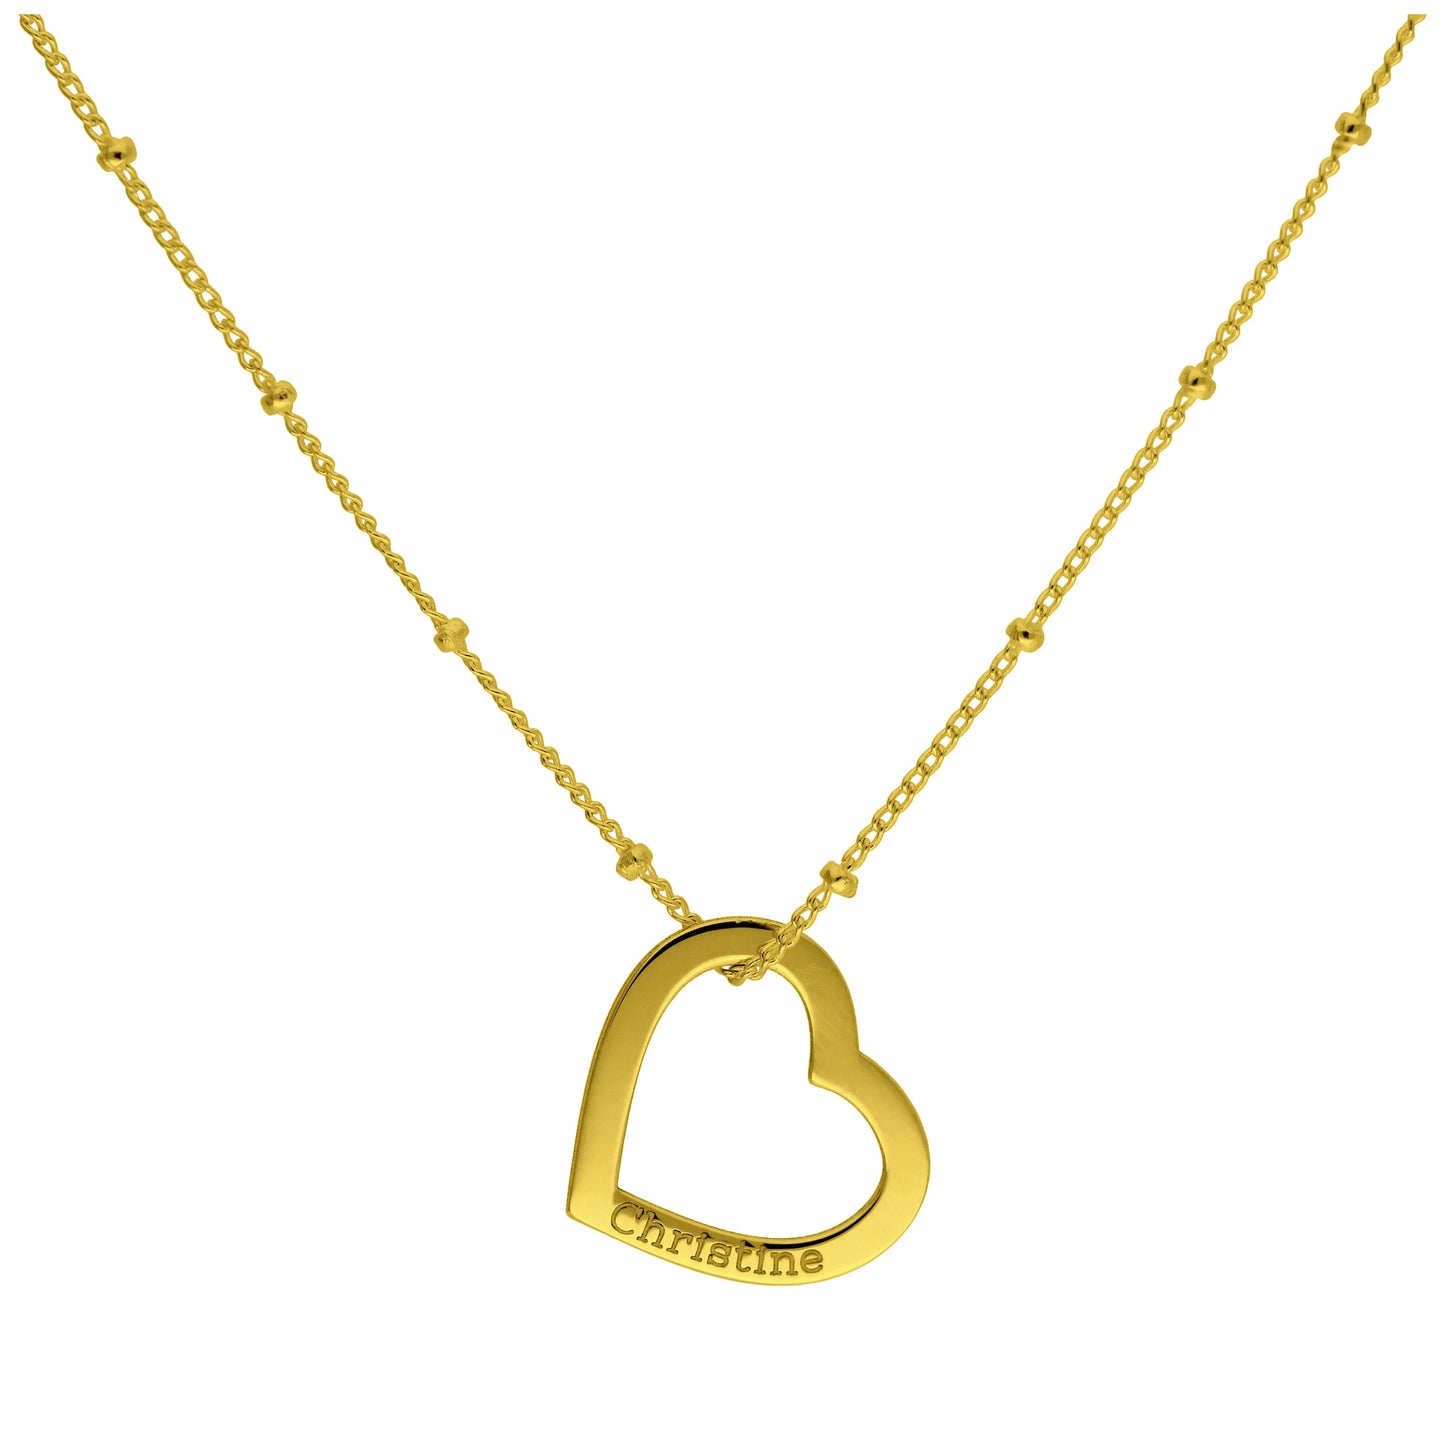 Bespoke Gold Plated Sterling Silver Open Floating Heart Name Necklace 12-24 Inches